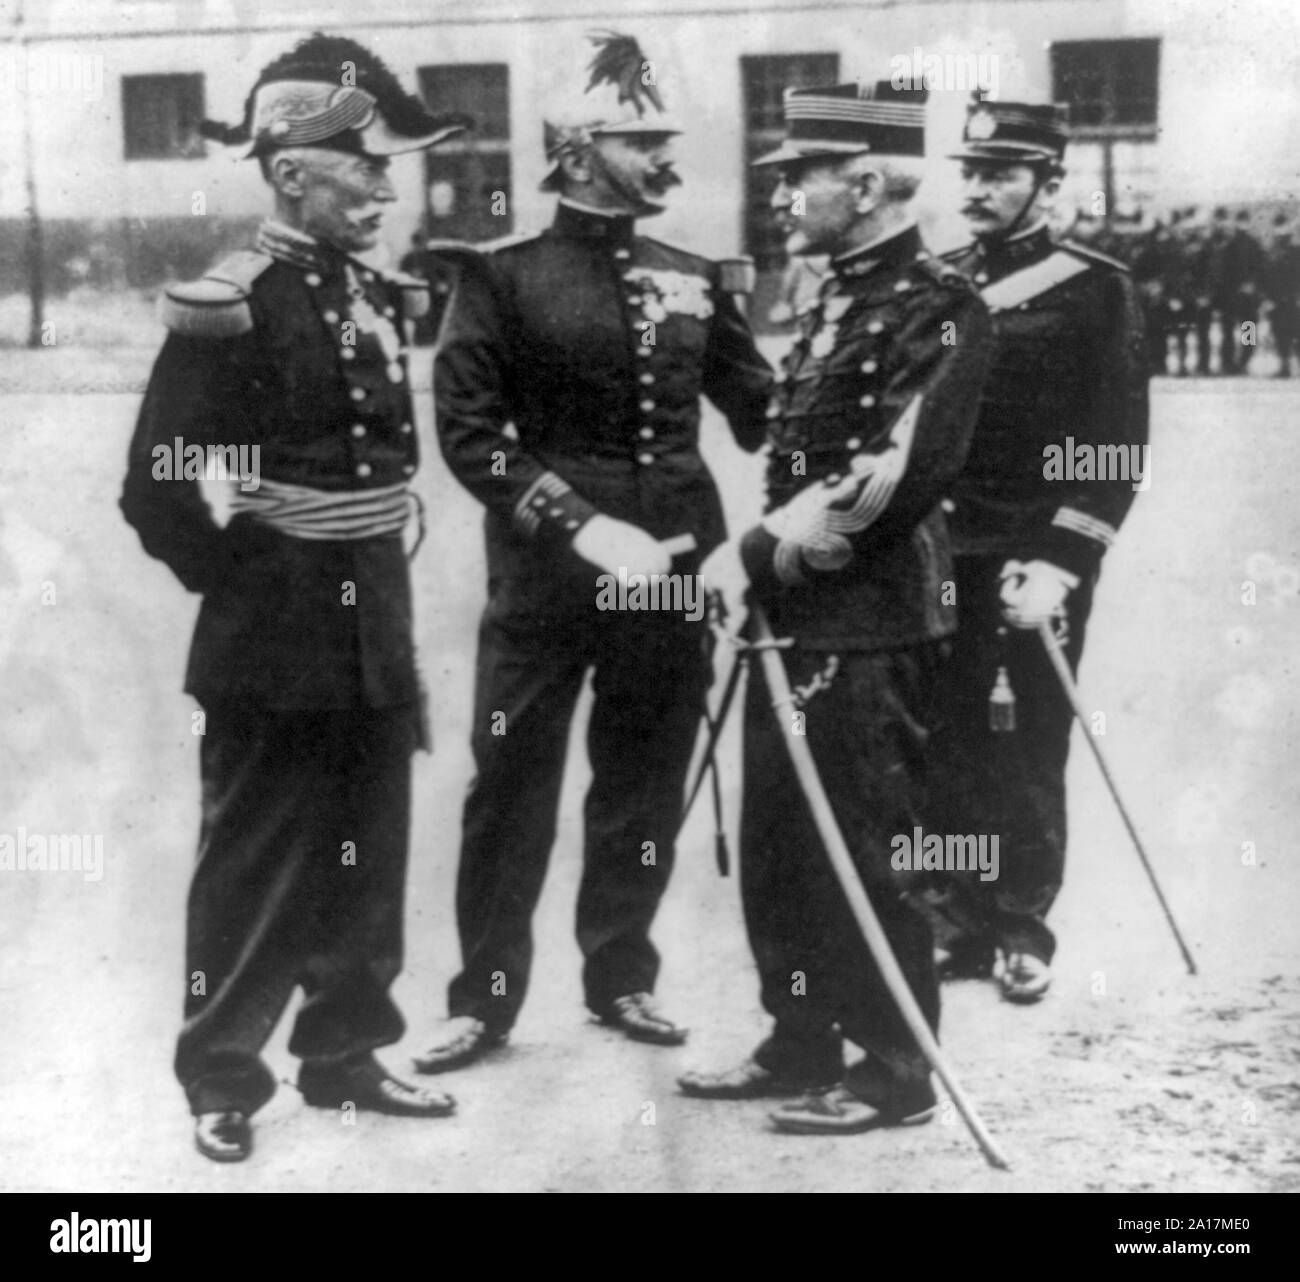 Captain Alfred Dreyfus with three French military officers, all in uniform, circa 1906 - 1916 Stock Photo